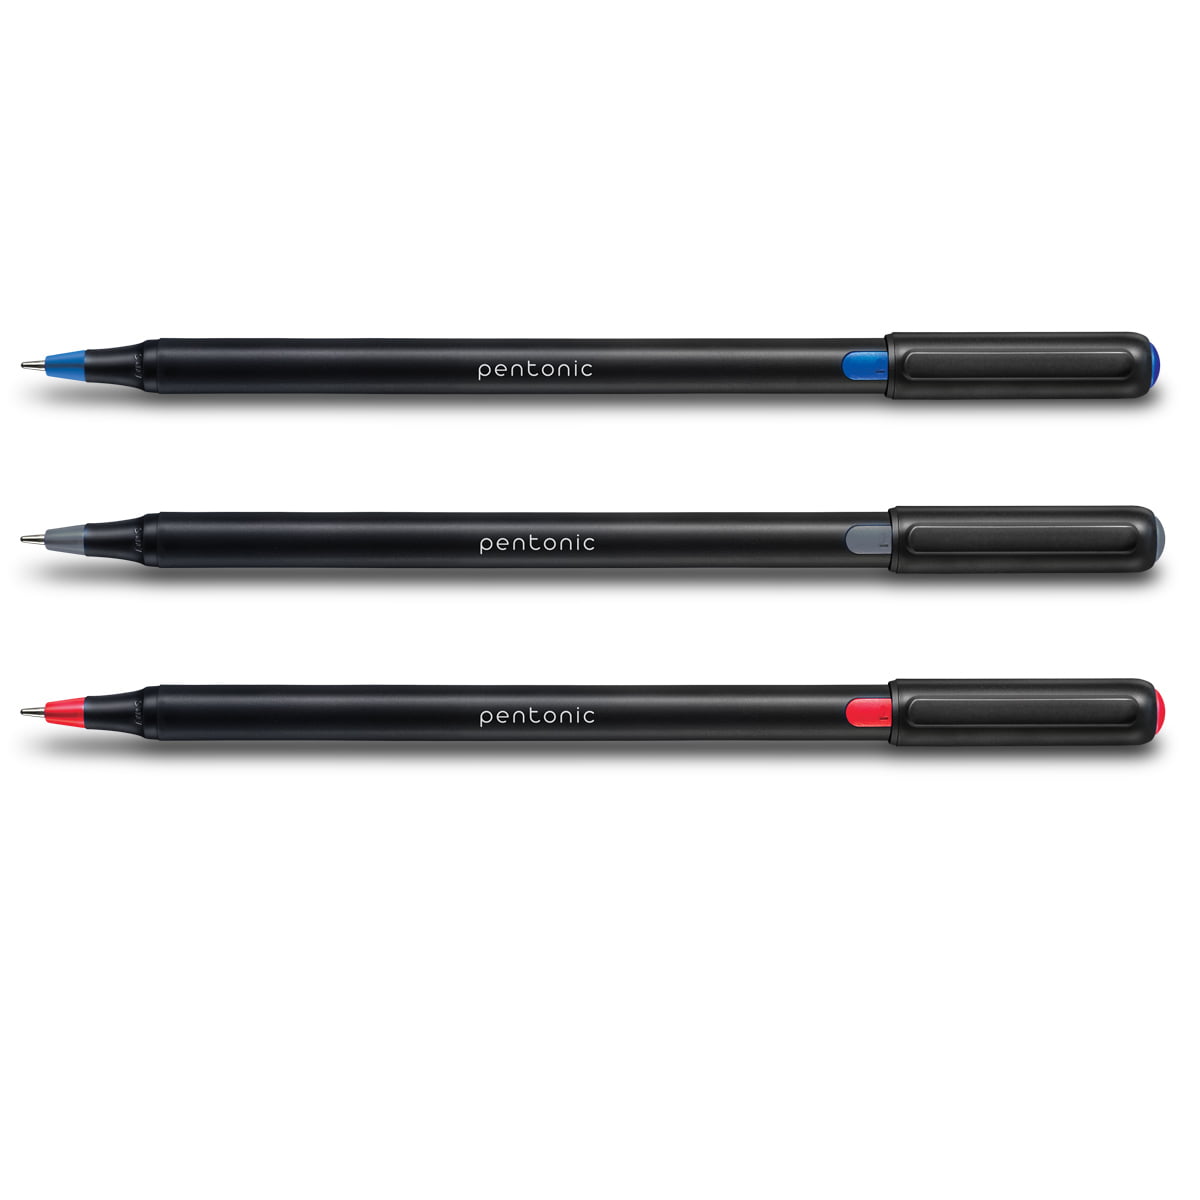 Dbkkmwwejcroim The tip top pen are available in multiple designs and styles to ensure you get perfect products for you. https www walmart com ip linc pentonic premium ball point pens 50 count black blue red 422103699